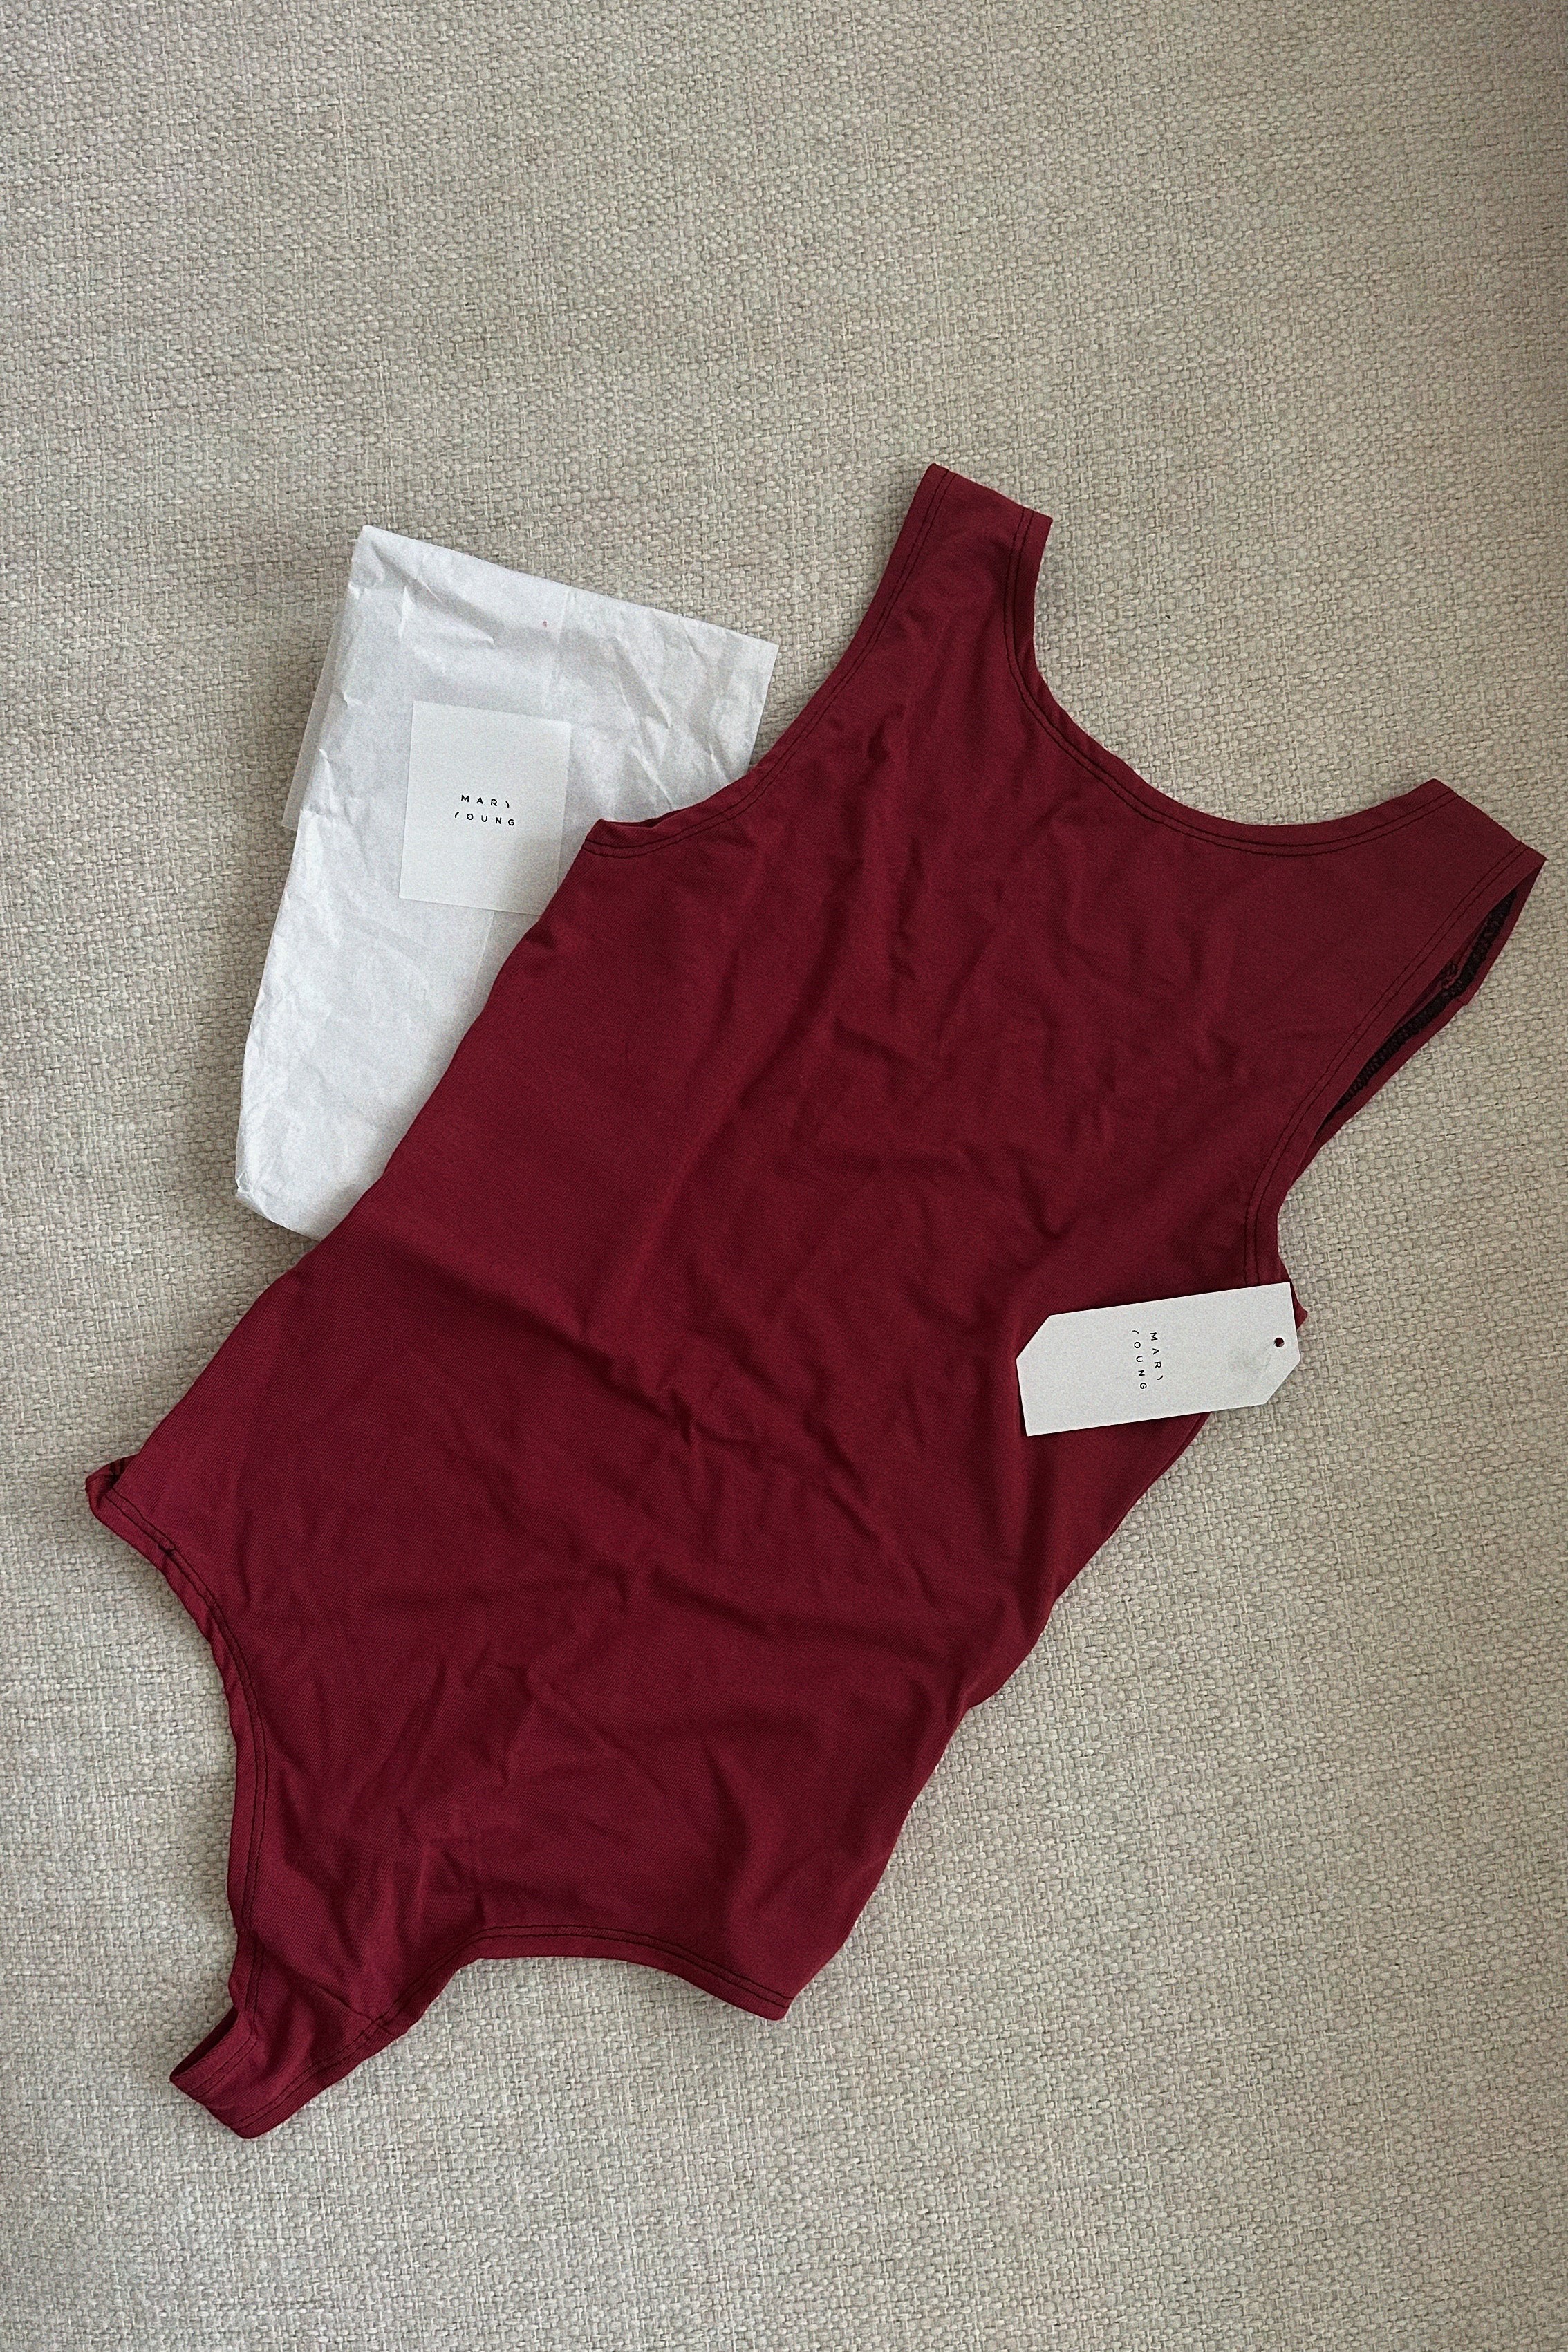 Backless Thong Bodysuit in Wine - MARY YOUNG